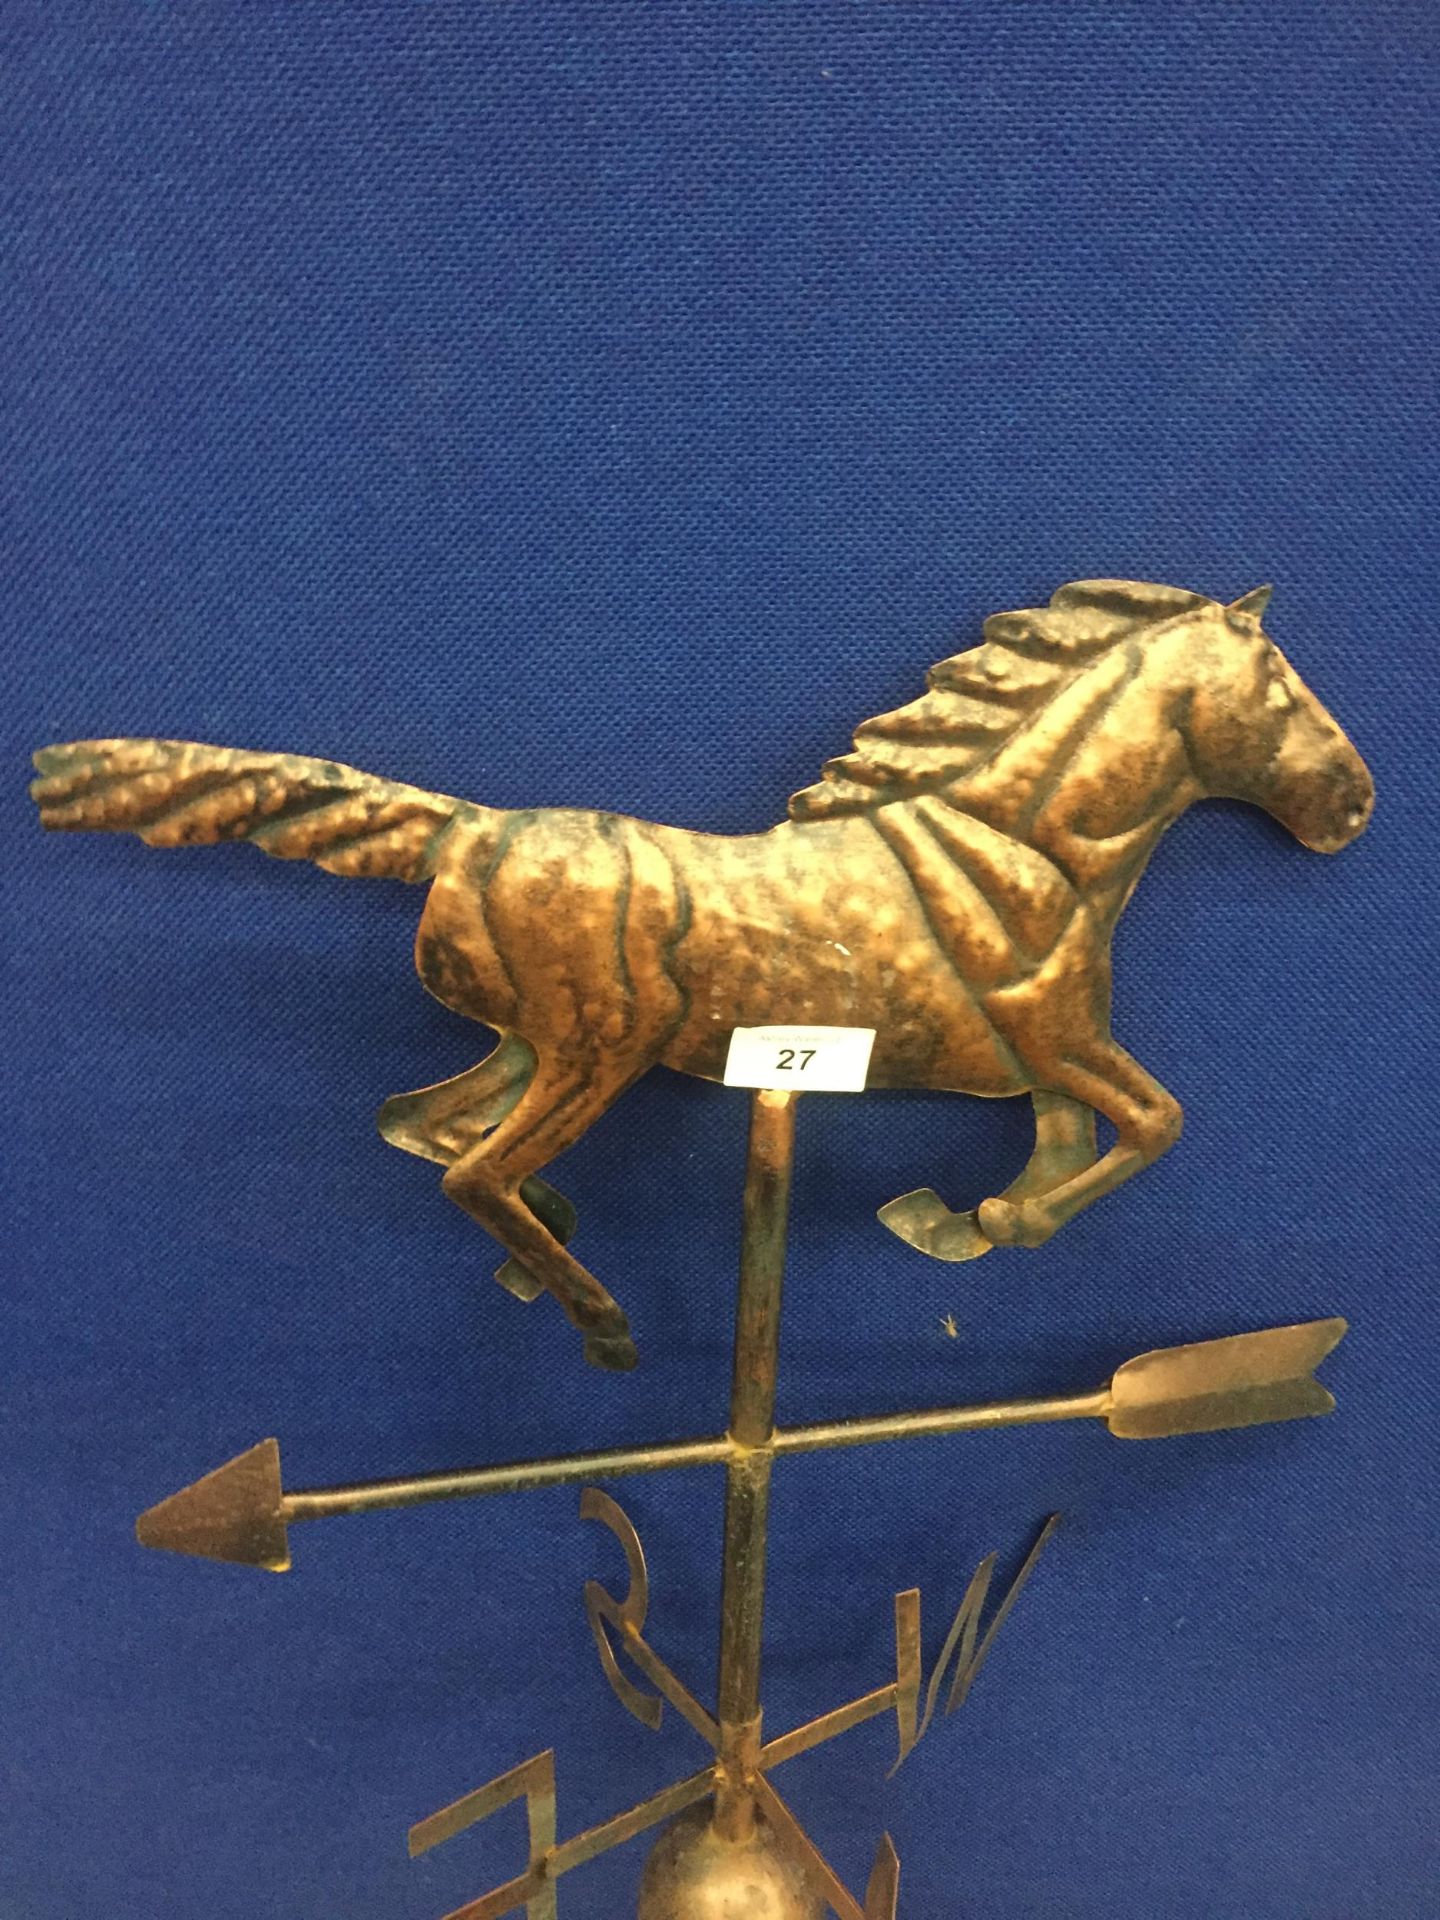 A VINTAGE COPPER EFFECT METAL WEATHER VANE WITH HORSE DESIGN TOP - Image 2 of 3